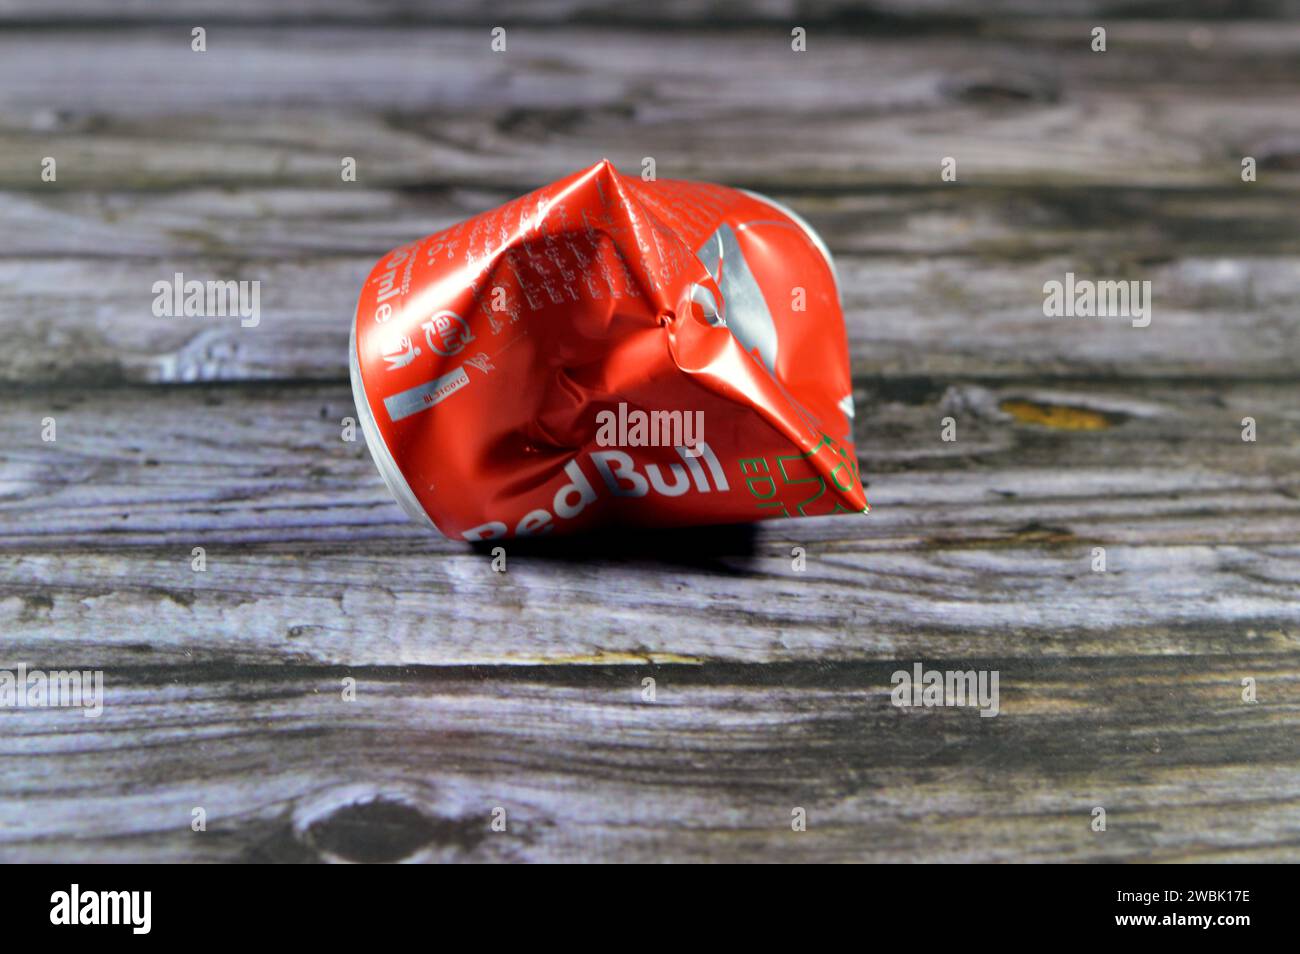 Cairo, Egypt, January 9 2024: Crushed dented Red Bull energy drink, a brand of energy drinks created and owned by the Austrian company Red Bull GmbH, Stock Photo